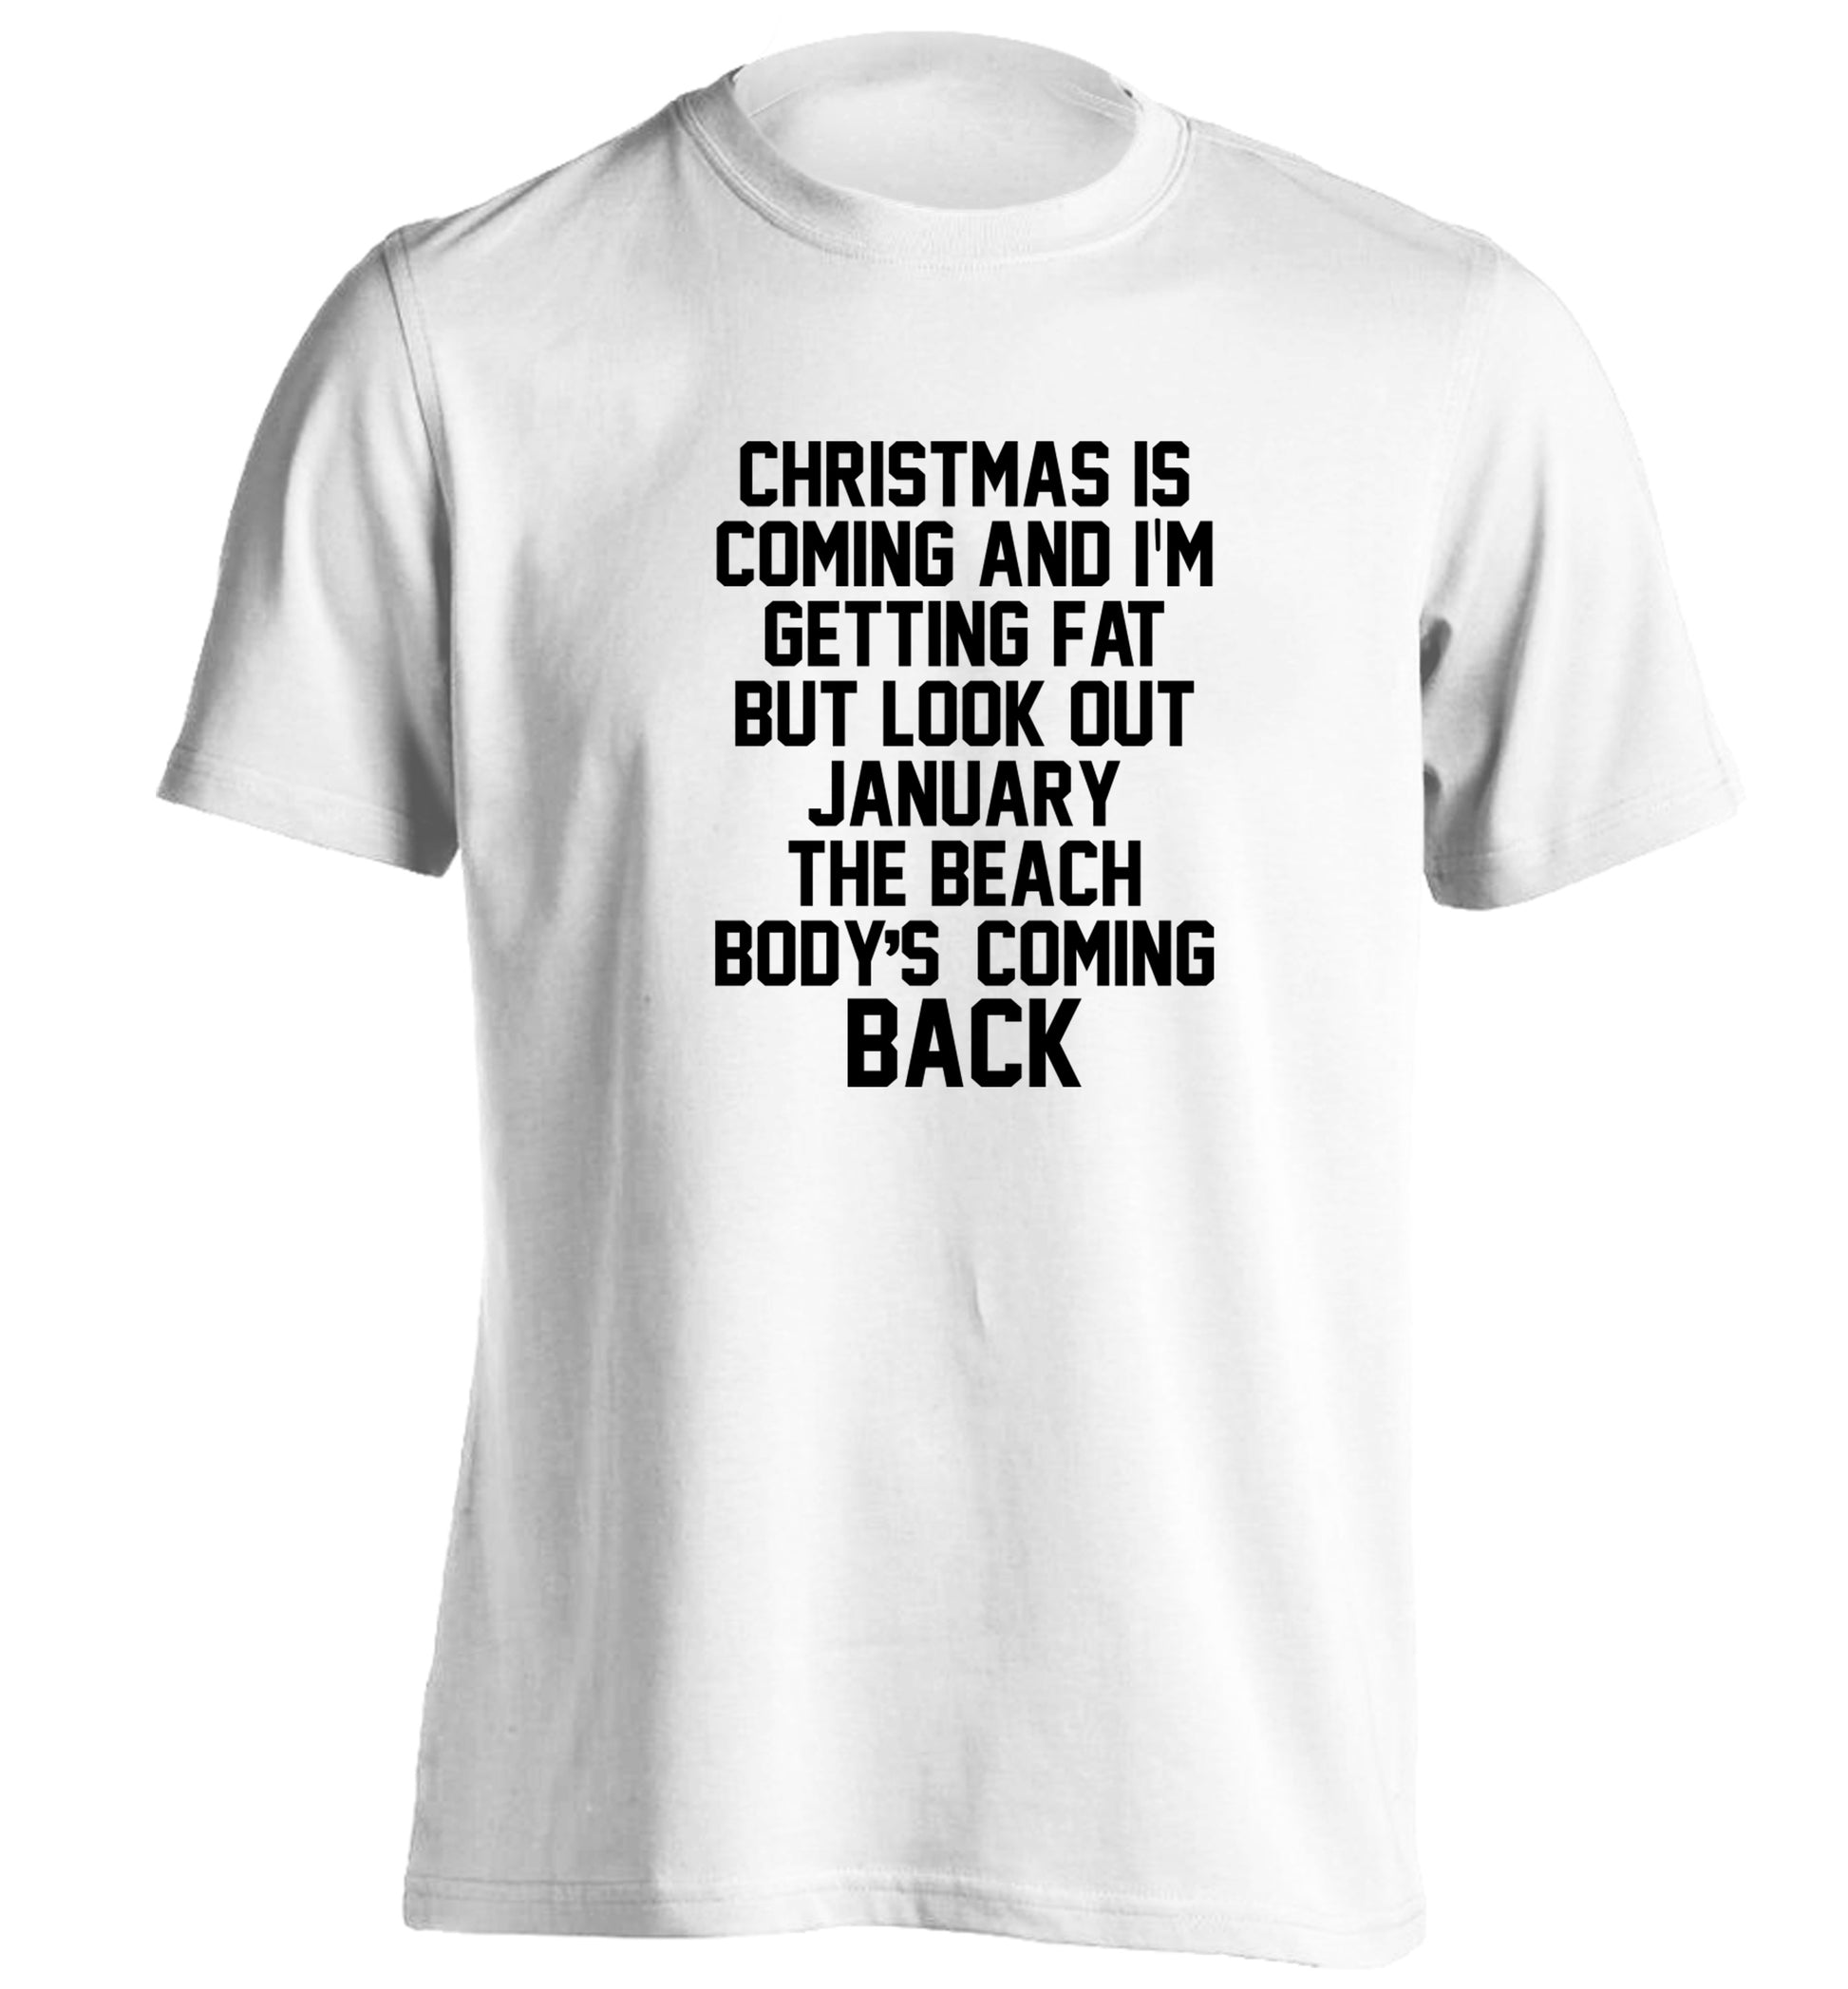 Christmas is coming and I'm getting fat but look out January the beach body's coming back! adults unisex white Tshirt 2XL